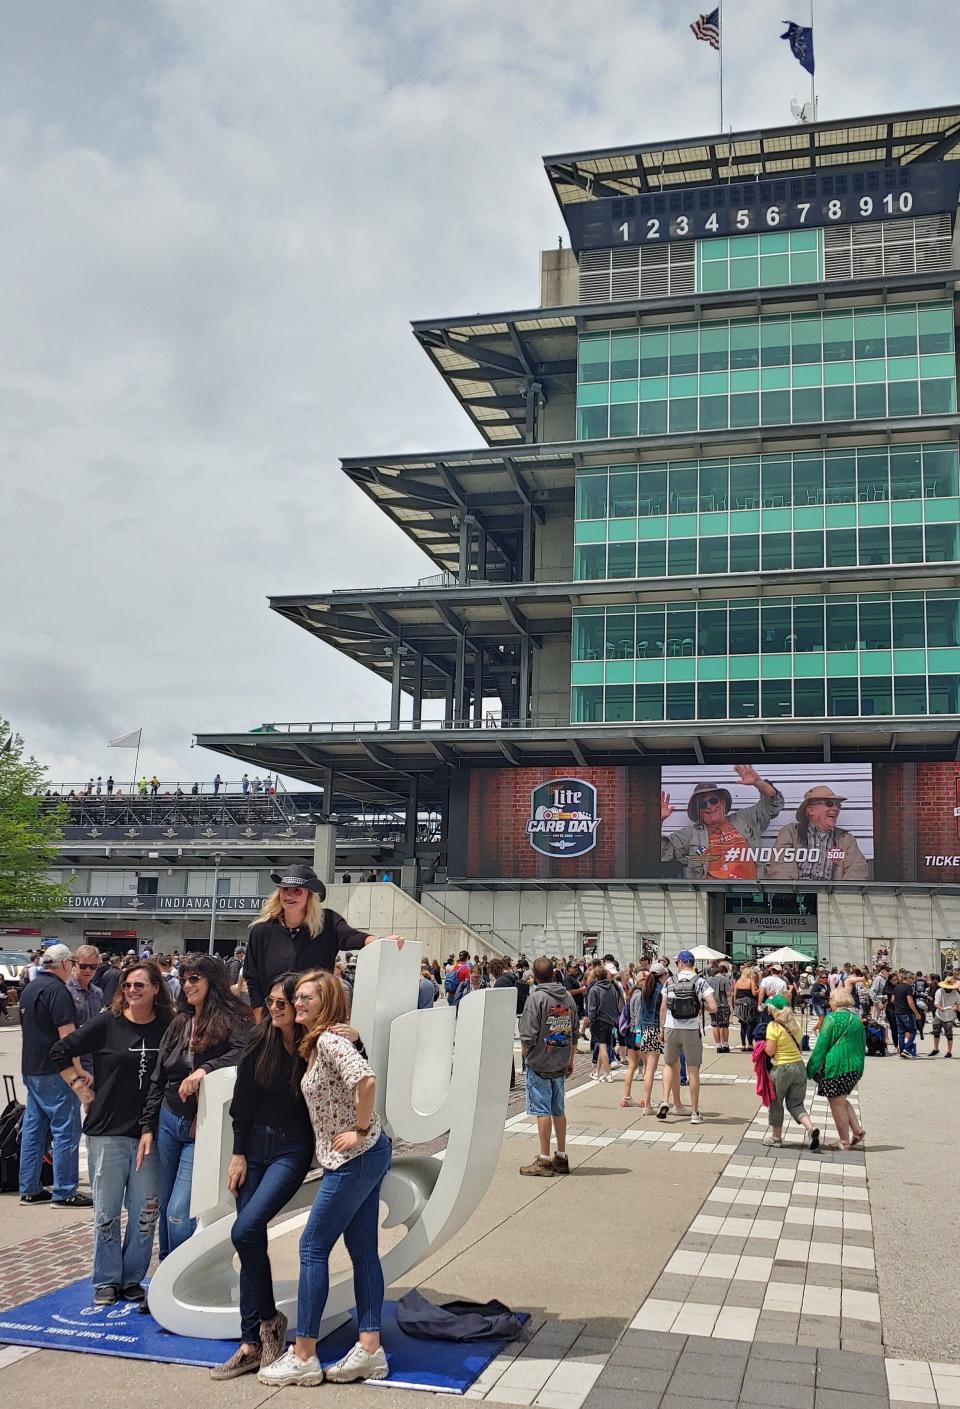 With the famed Pagoda as backdrop, the infield "Indy" sign is always a popular spot for photos.